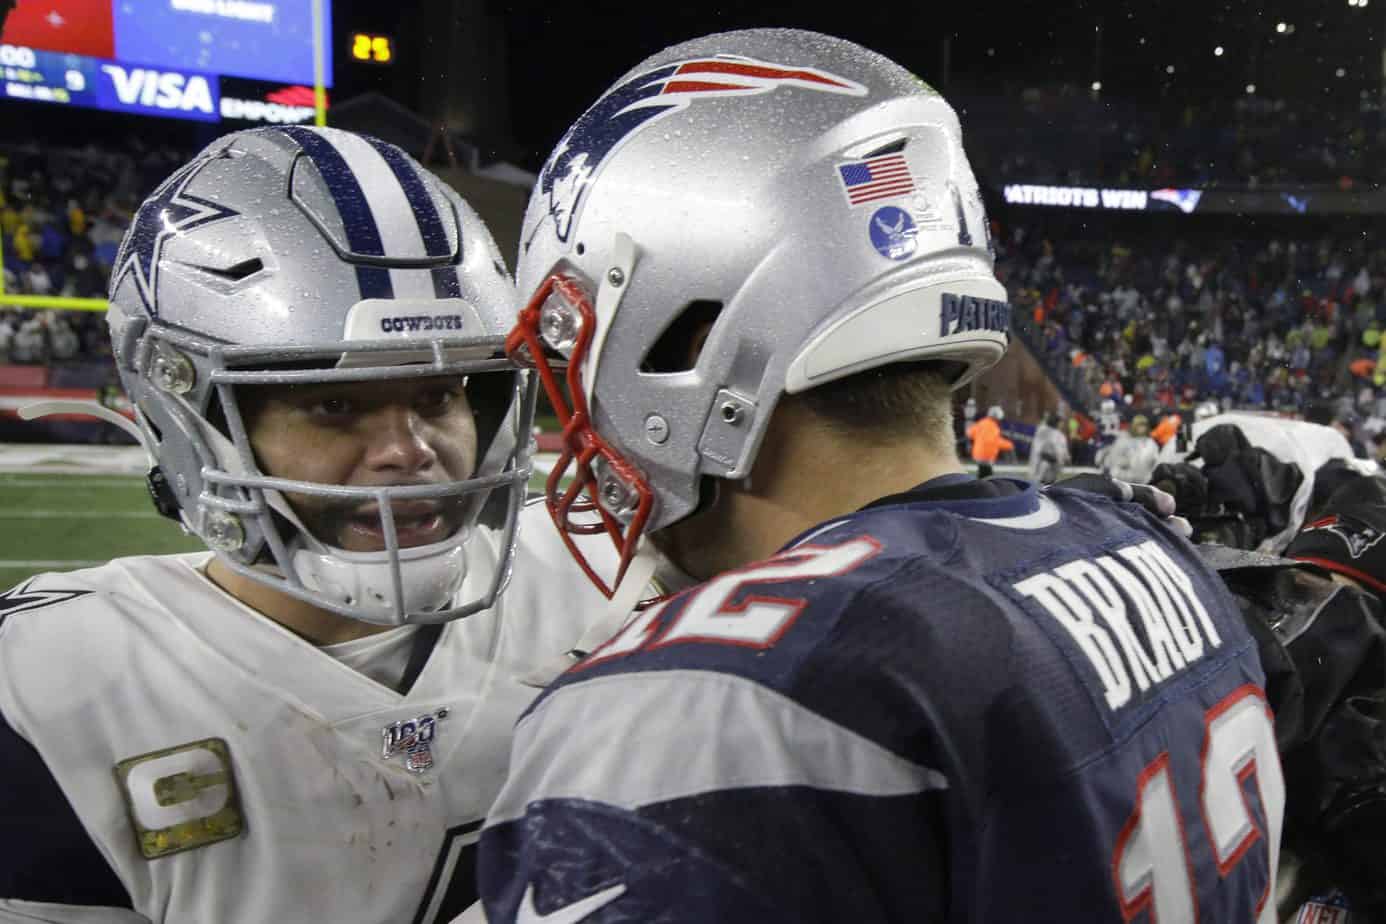 After the instant classic on Thursday night, Dak Prescott made sure to send Tom Brady a message about where he sees his team going this season